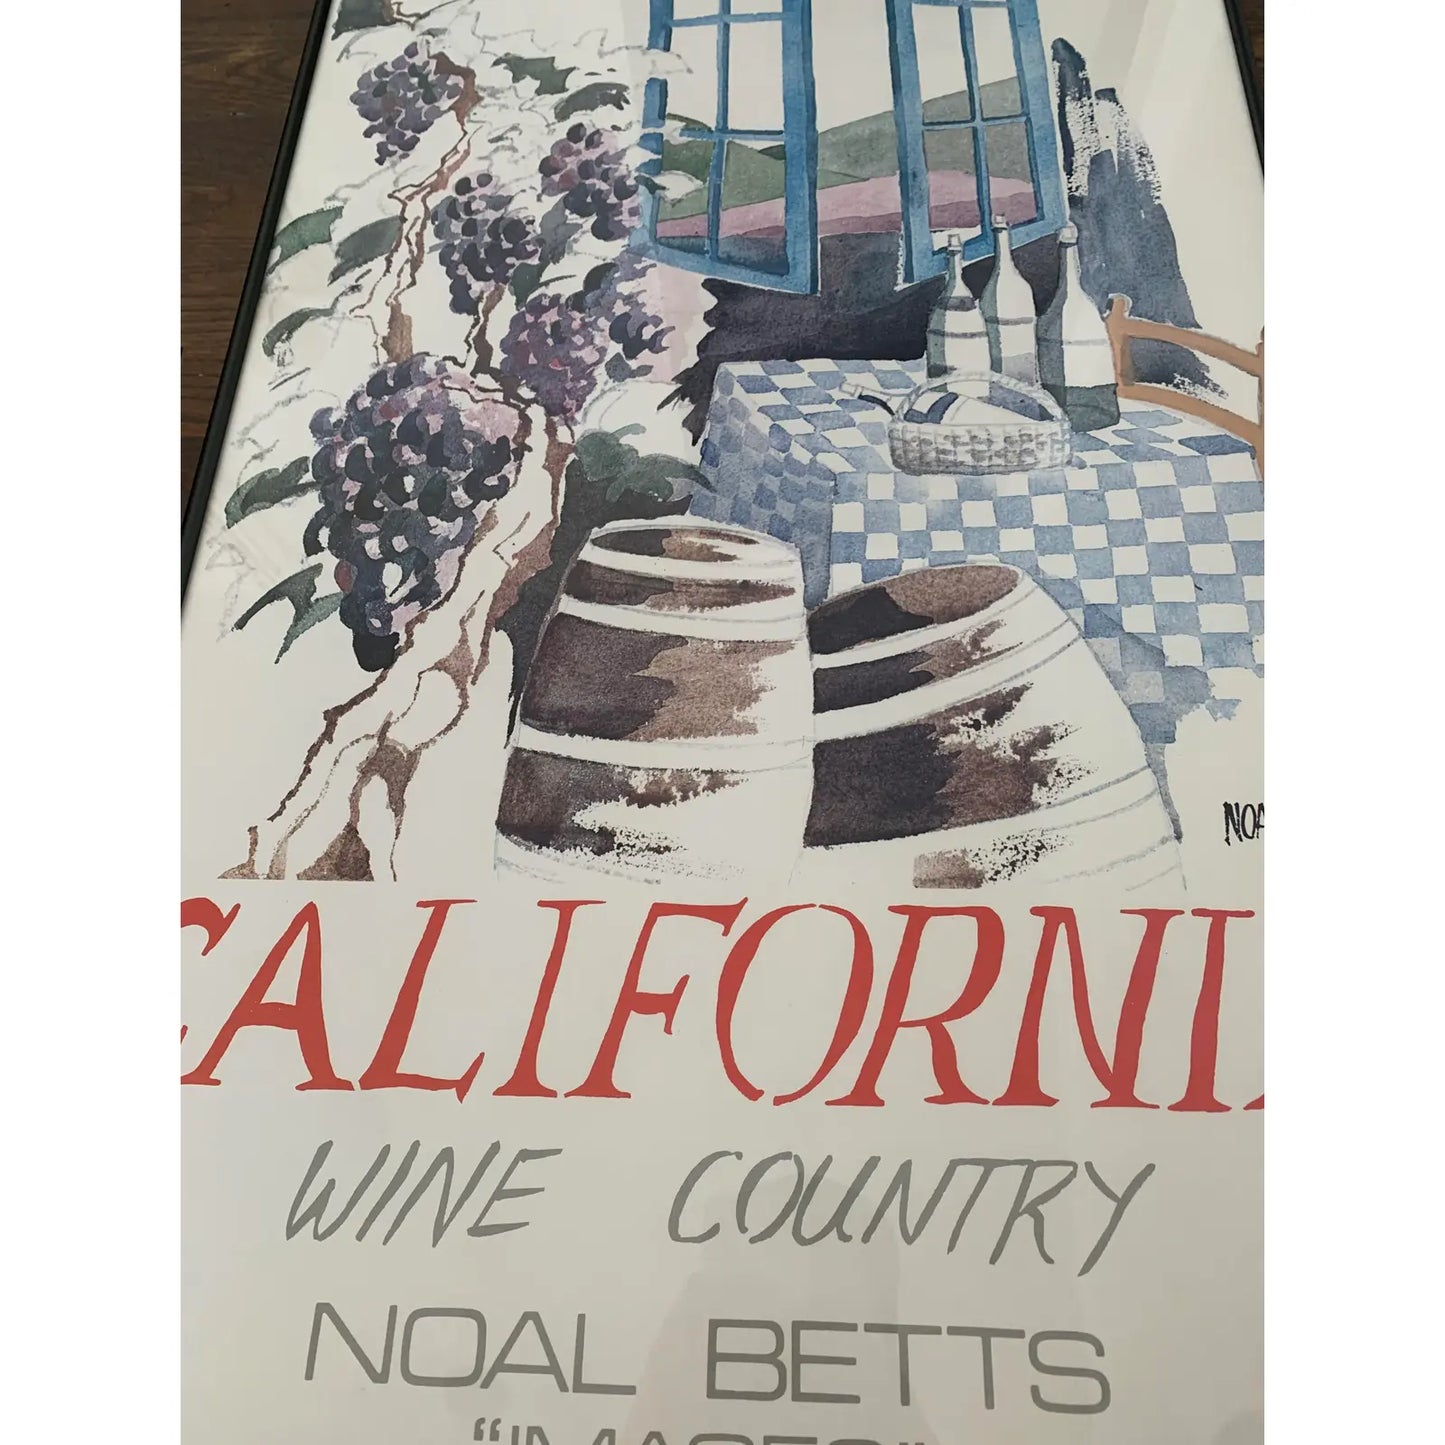 1980s Noal Betts California Wine Country Lithograph Poster, Framed